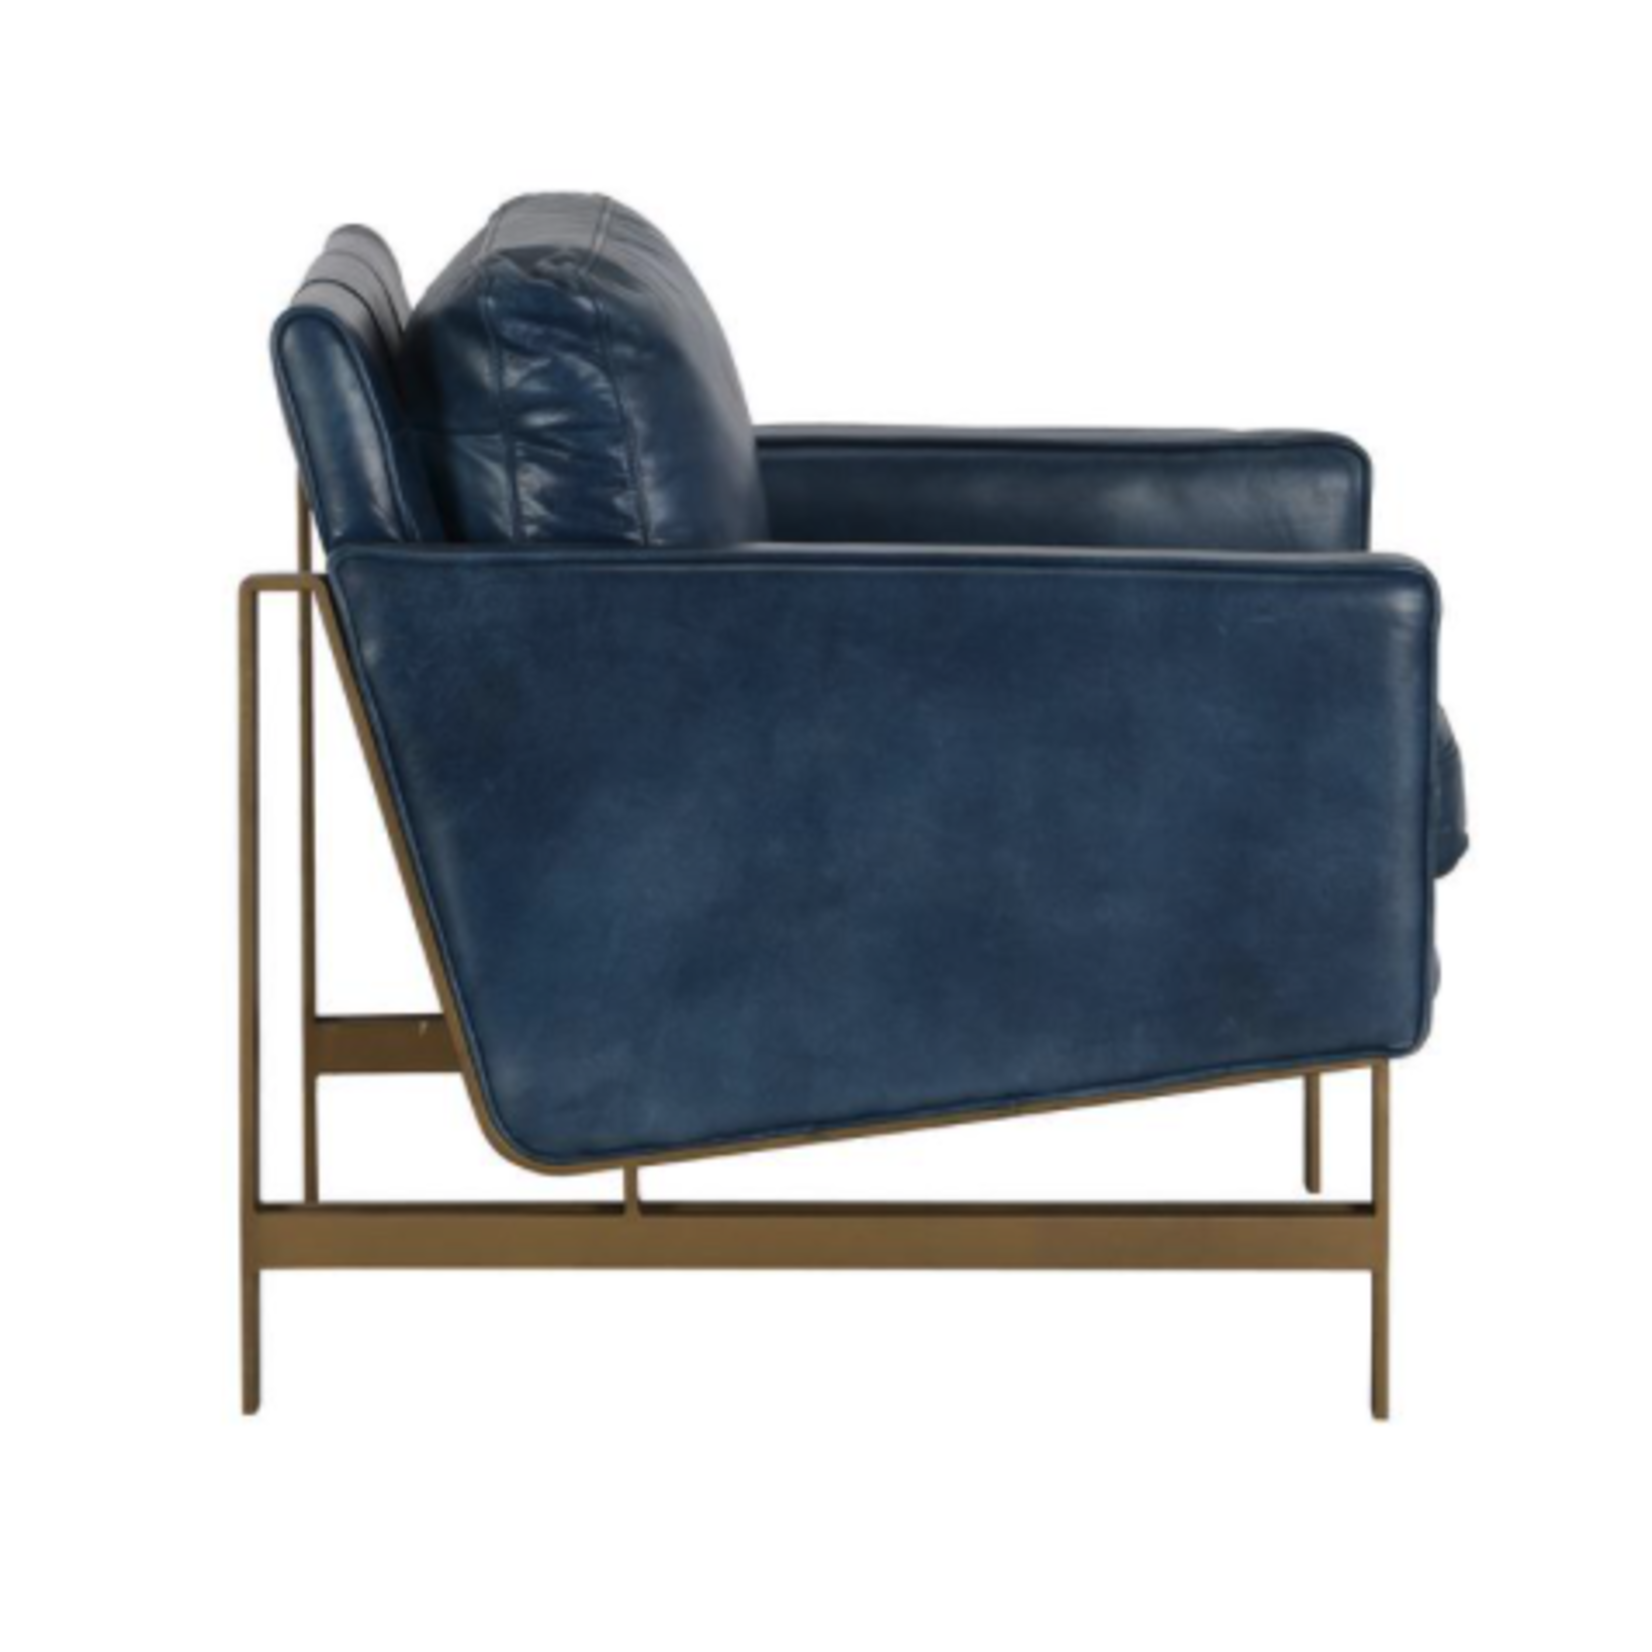 Outside The Box Chazzie Top Grain Blue Leather Club Chair